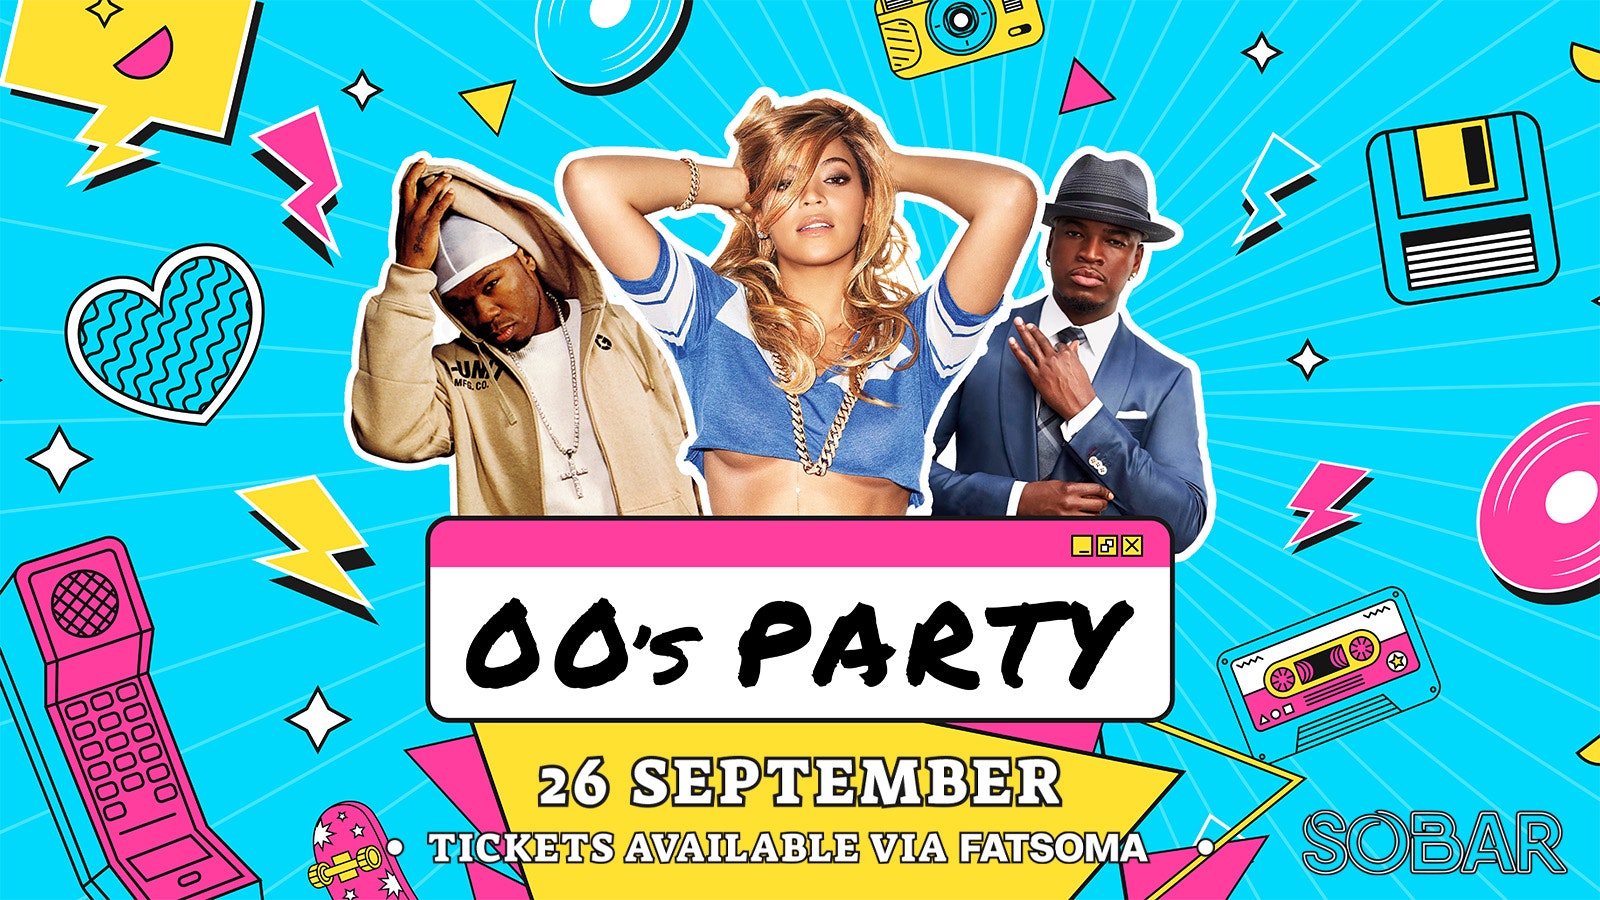 Birmingham Freshers | 00’s Party | Sobar | £1 Tickets On Sale Now